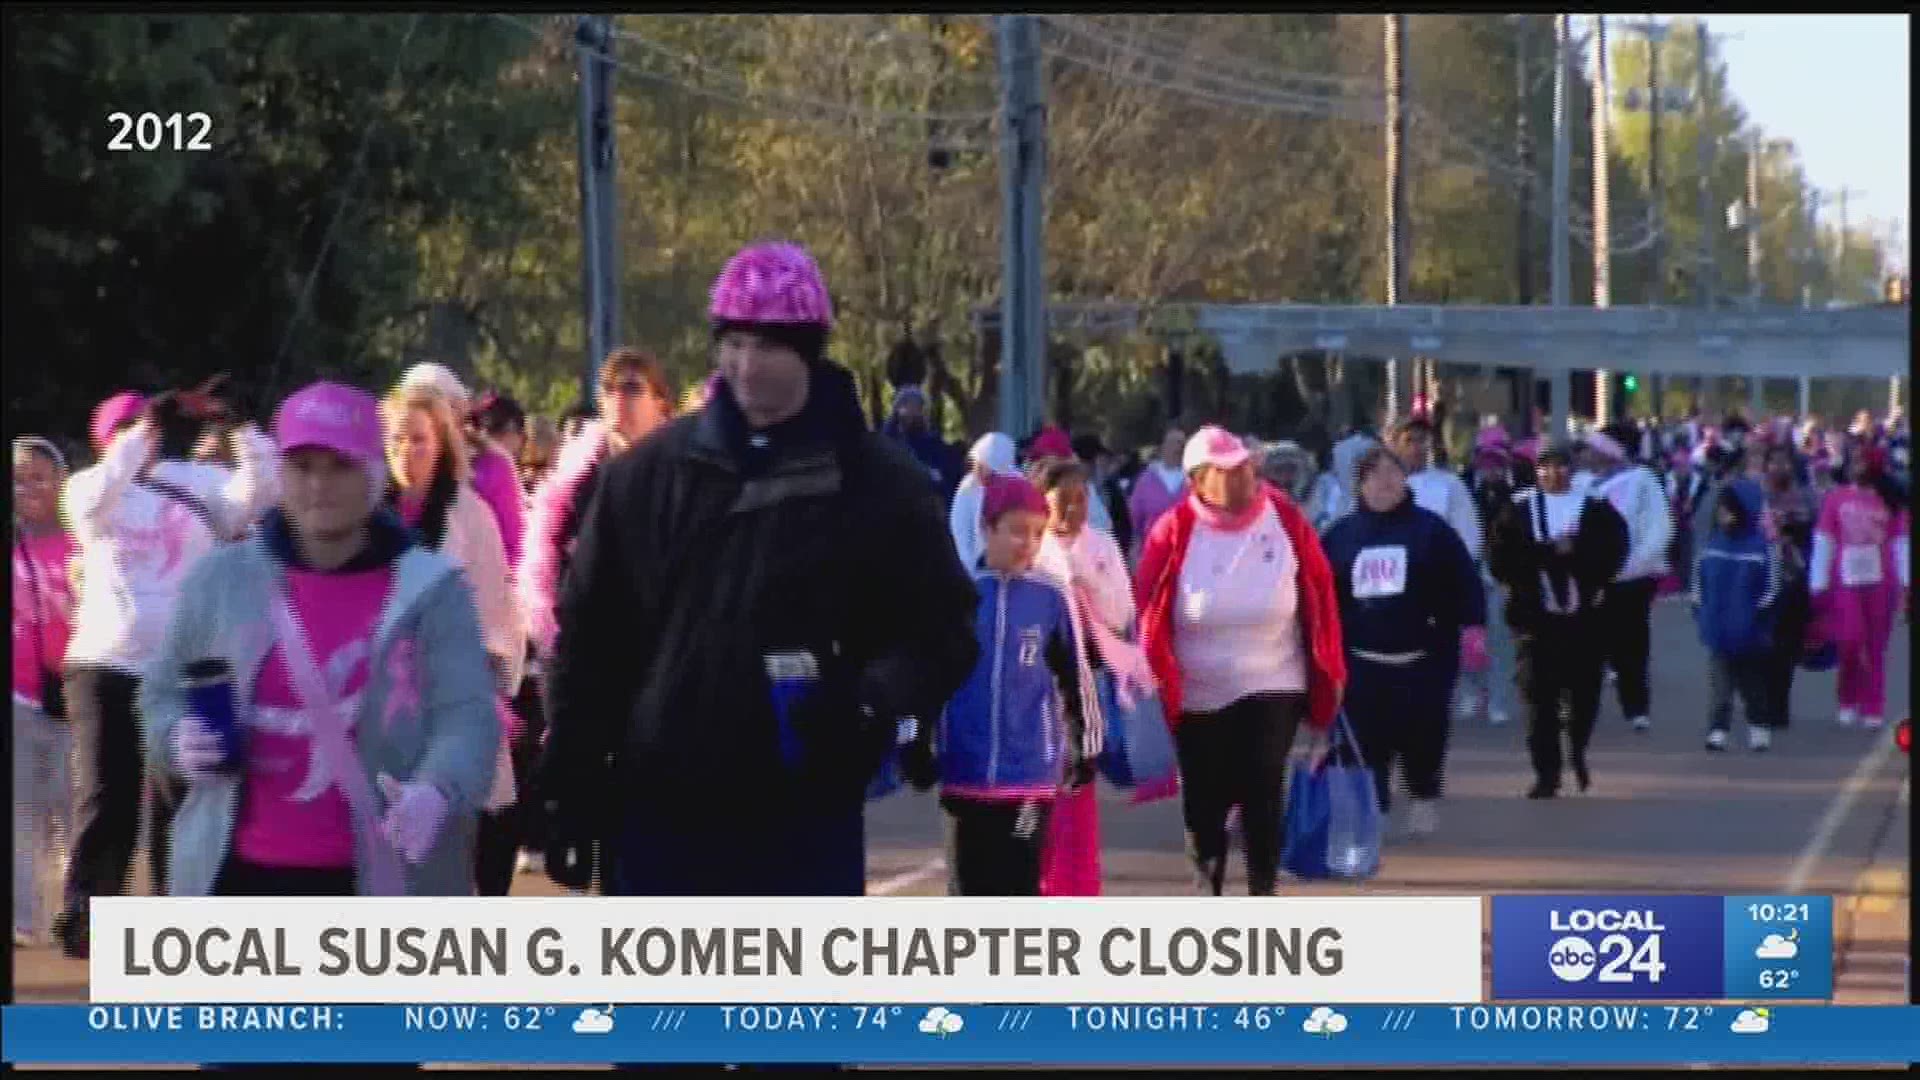 Dozens of Susan G. Komen chapters around the country are closing as the nonprofit consolidates operations.